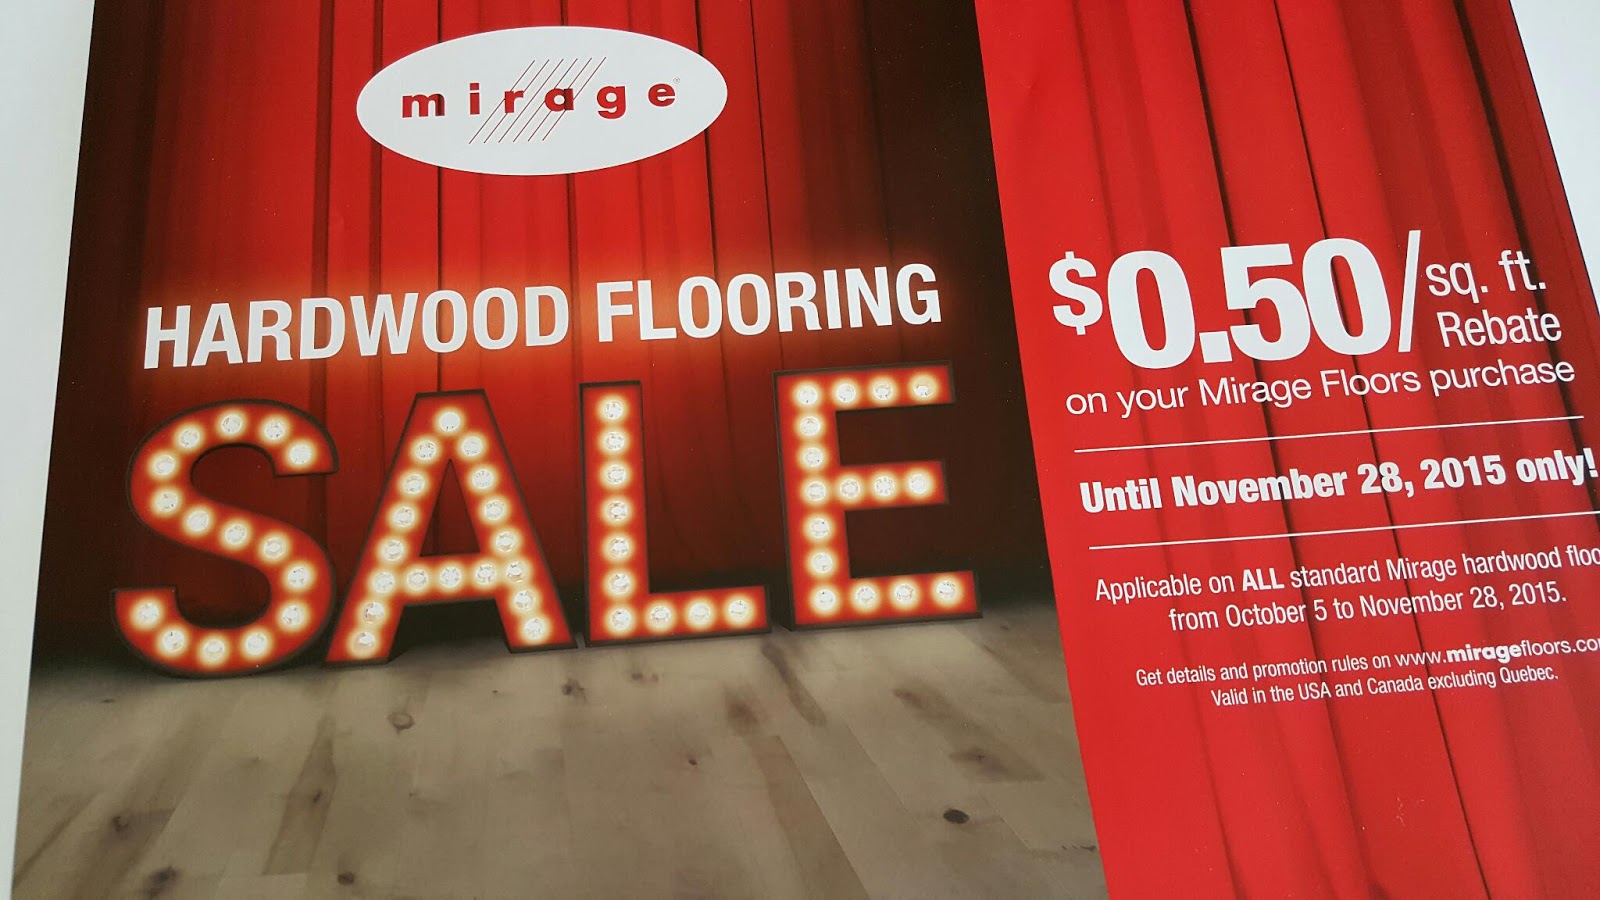 mirage-spring-2016-rebate-sale-will-take-place-march-21-may-14